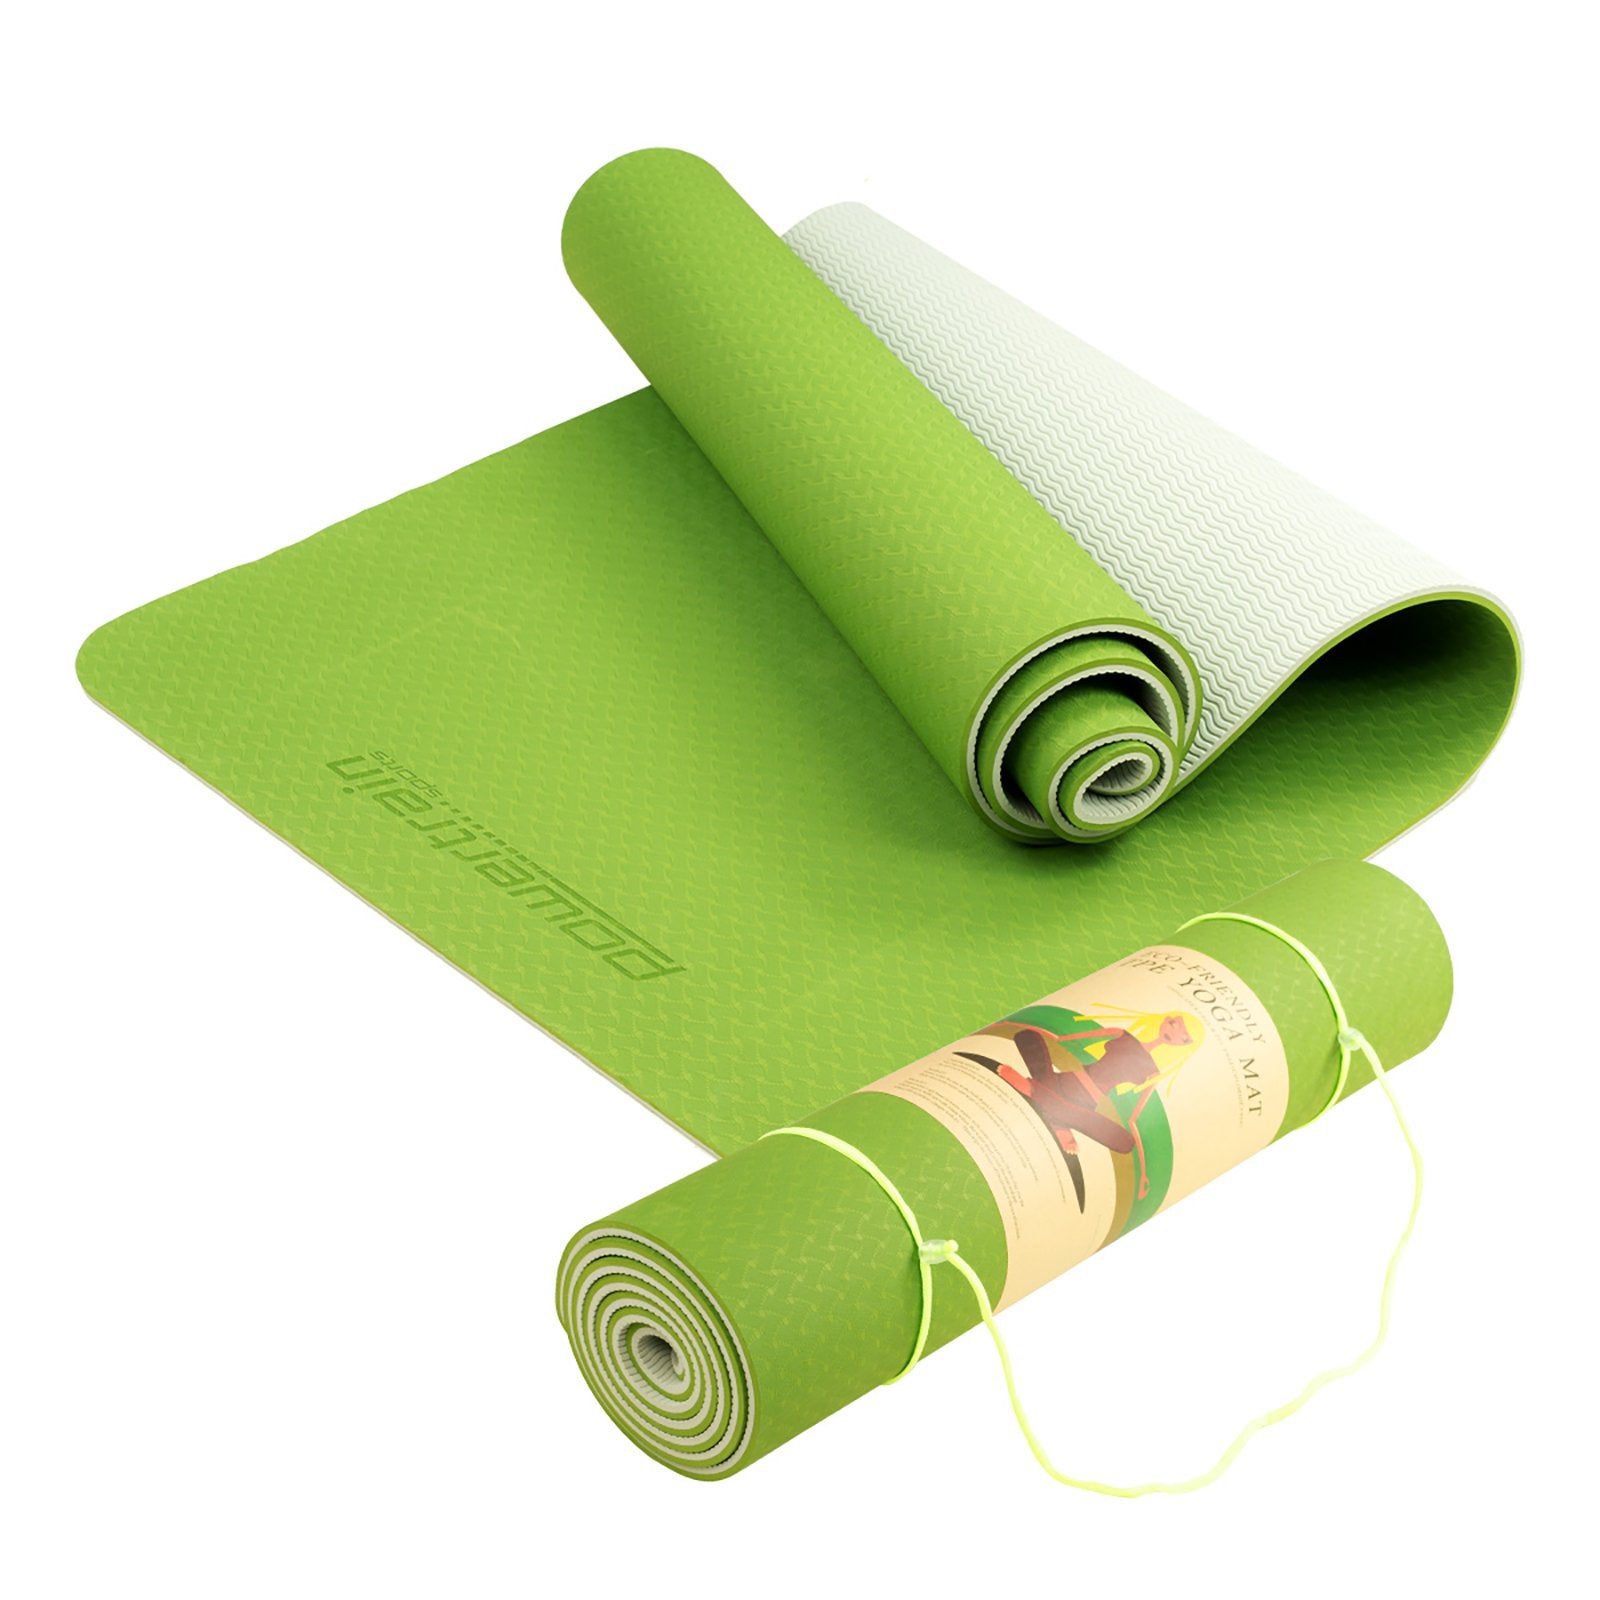 Powertrain Eco-Friendly Dual layer 8mm Yoga Mat | Lime Green | Non-Slip Surface, and Carry Strap for Ultimate Comfort and Portability